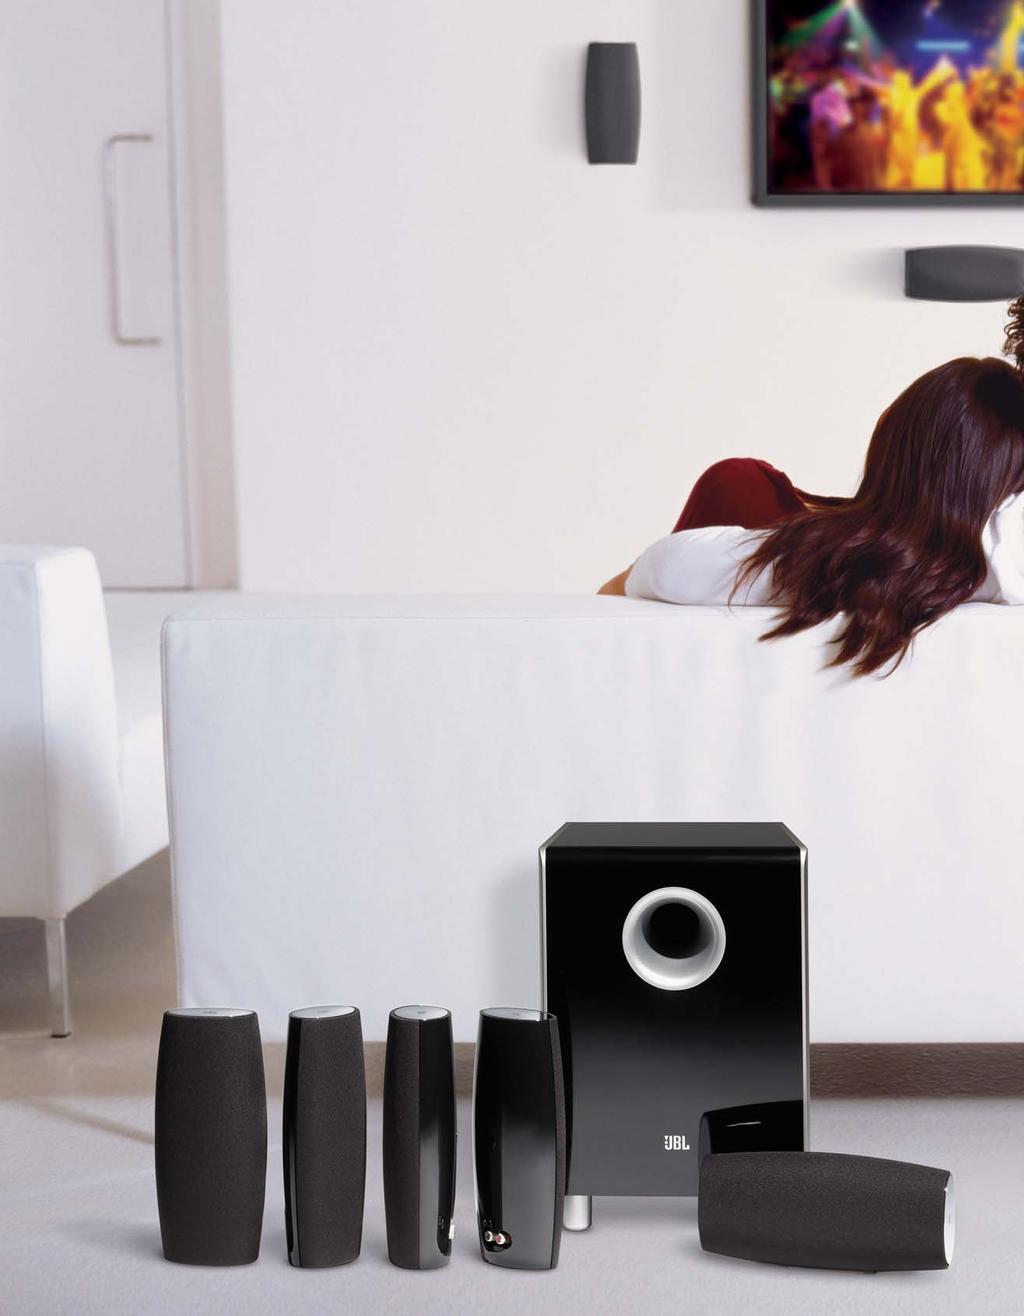 STUNNING MULTICHANNEL SOUND. BOTH JBL CINEMA SOUND HOME THEATER SPEAKER SYSTEMS ARE COMPLETE WITH VOICE-MATCHED SATELLITES, CENTER CHANNEL SPEAKERS AND POWERED SUBWOOFERS.